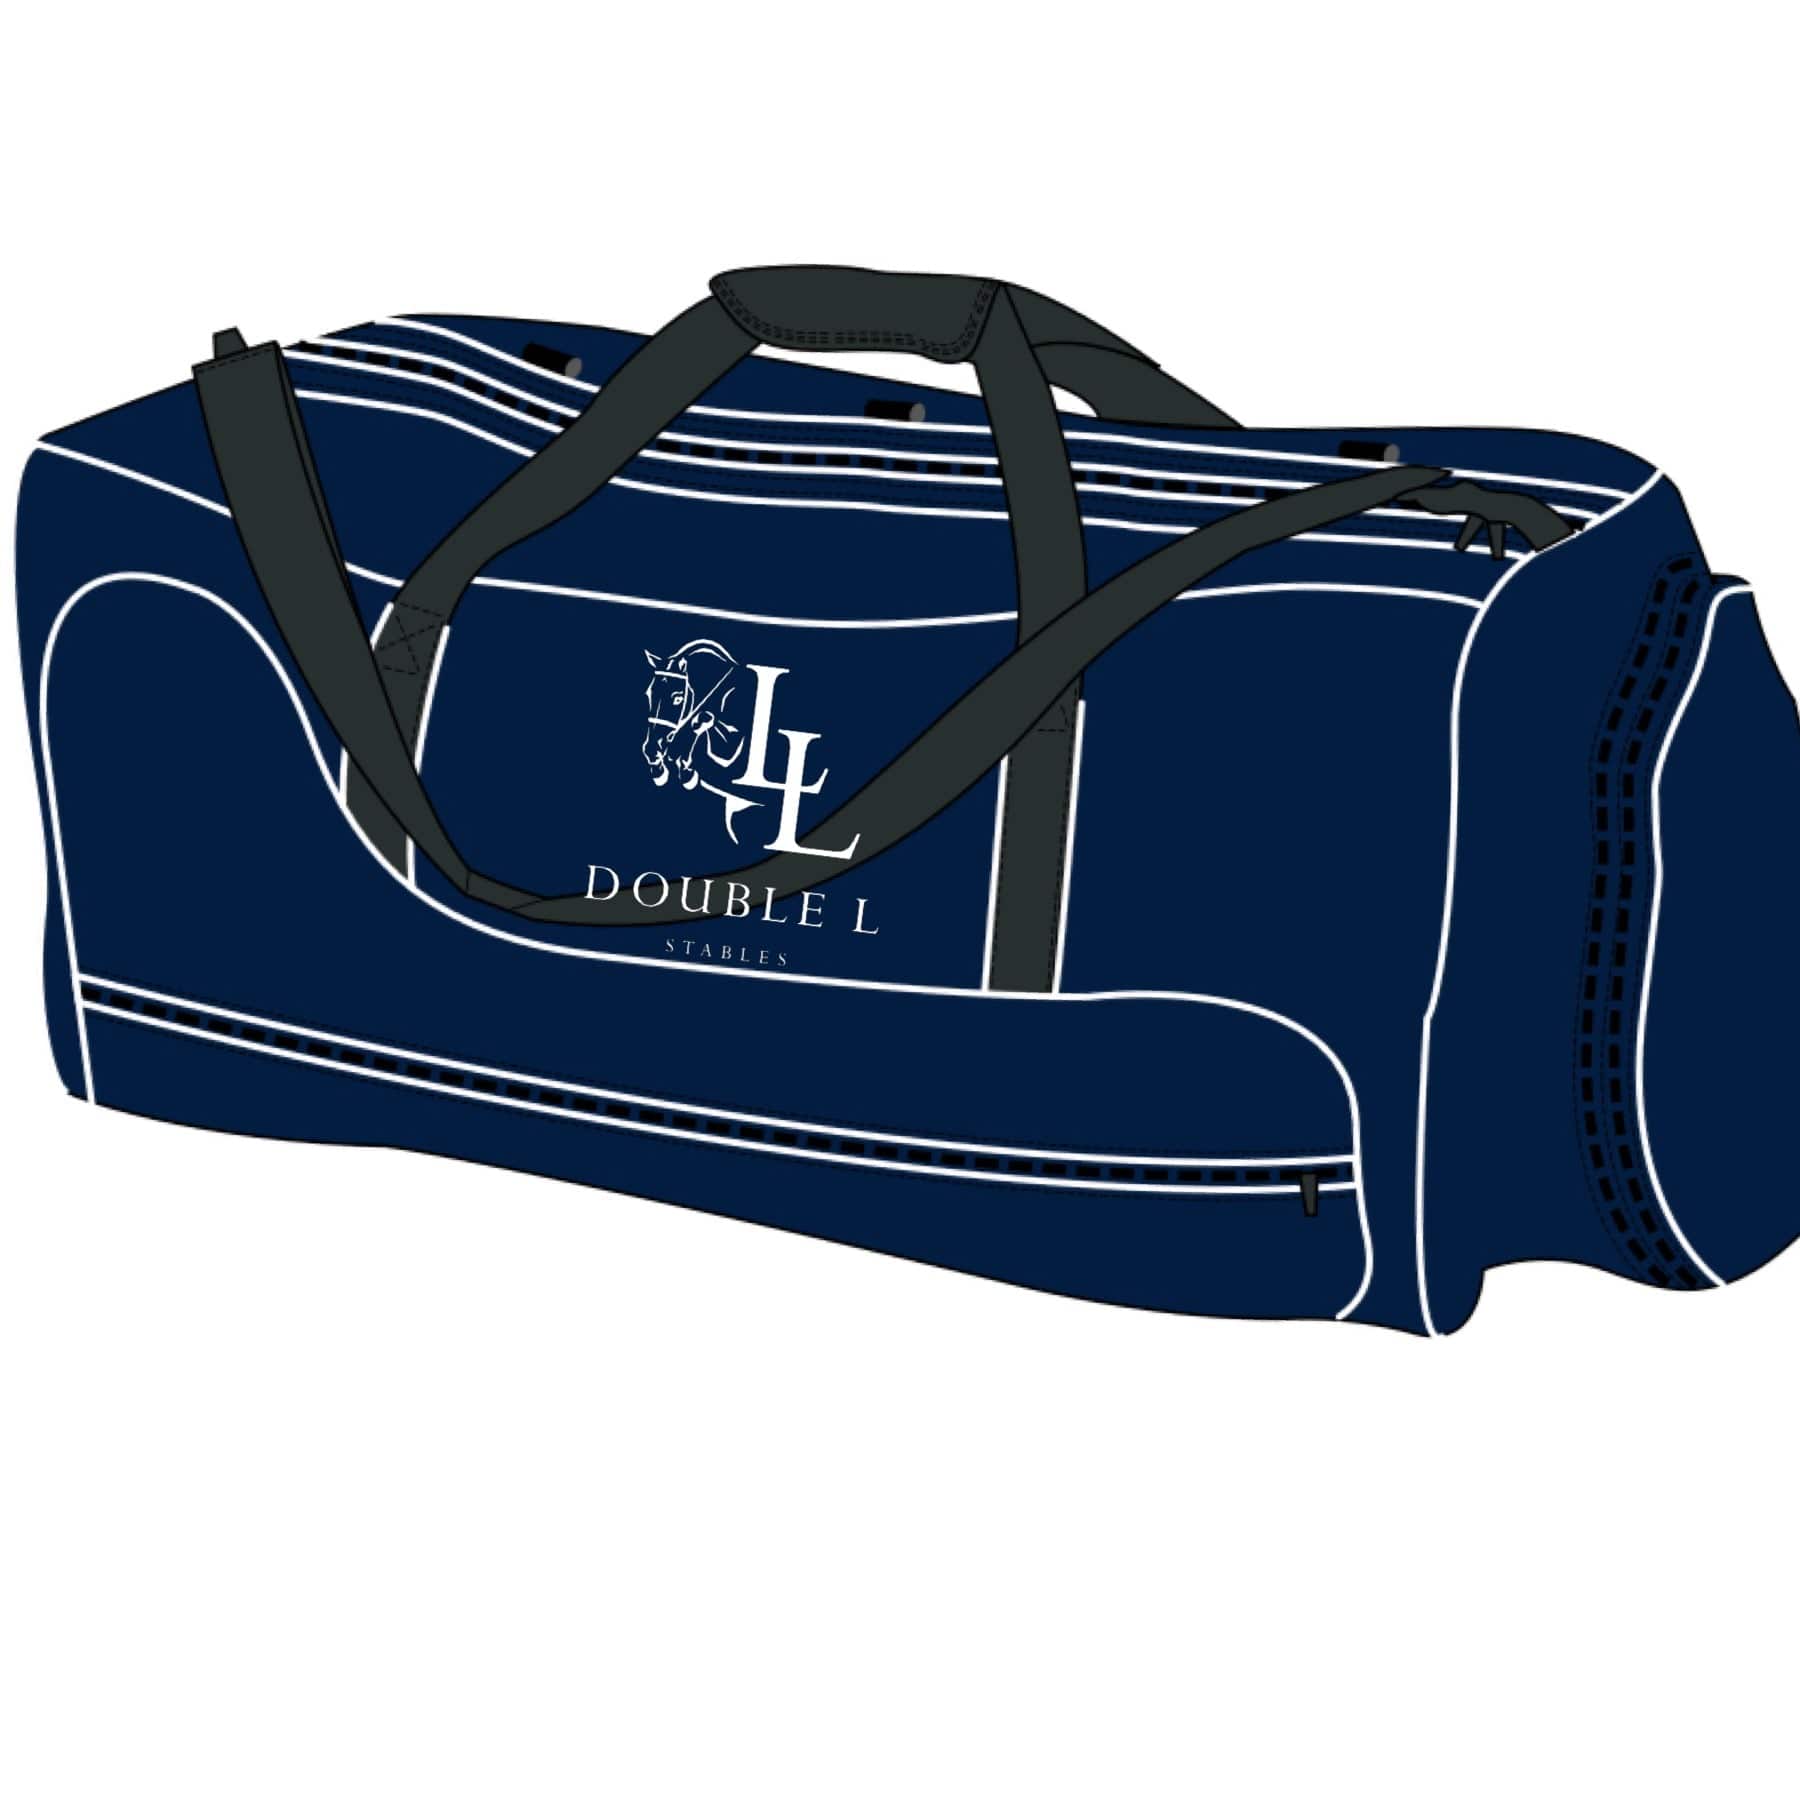 Equestrian Team Apparel Double L Stables Gear Duffle equestrian team apparel online tack store mobile tack store custom farm apparel custom show stable clothing equestrian lifestyle horse show clothing riding clothes horses equestrian tack store